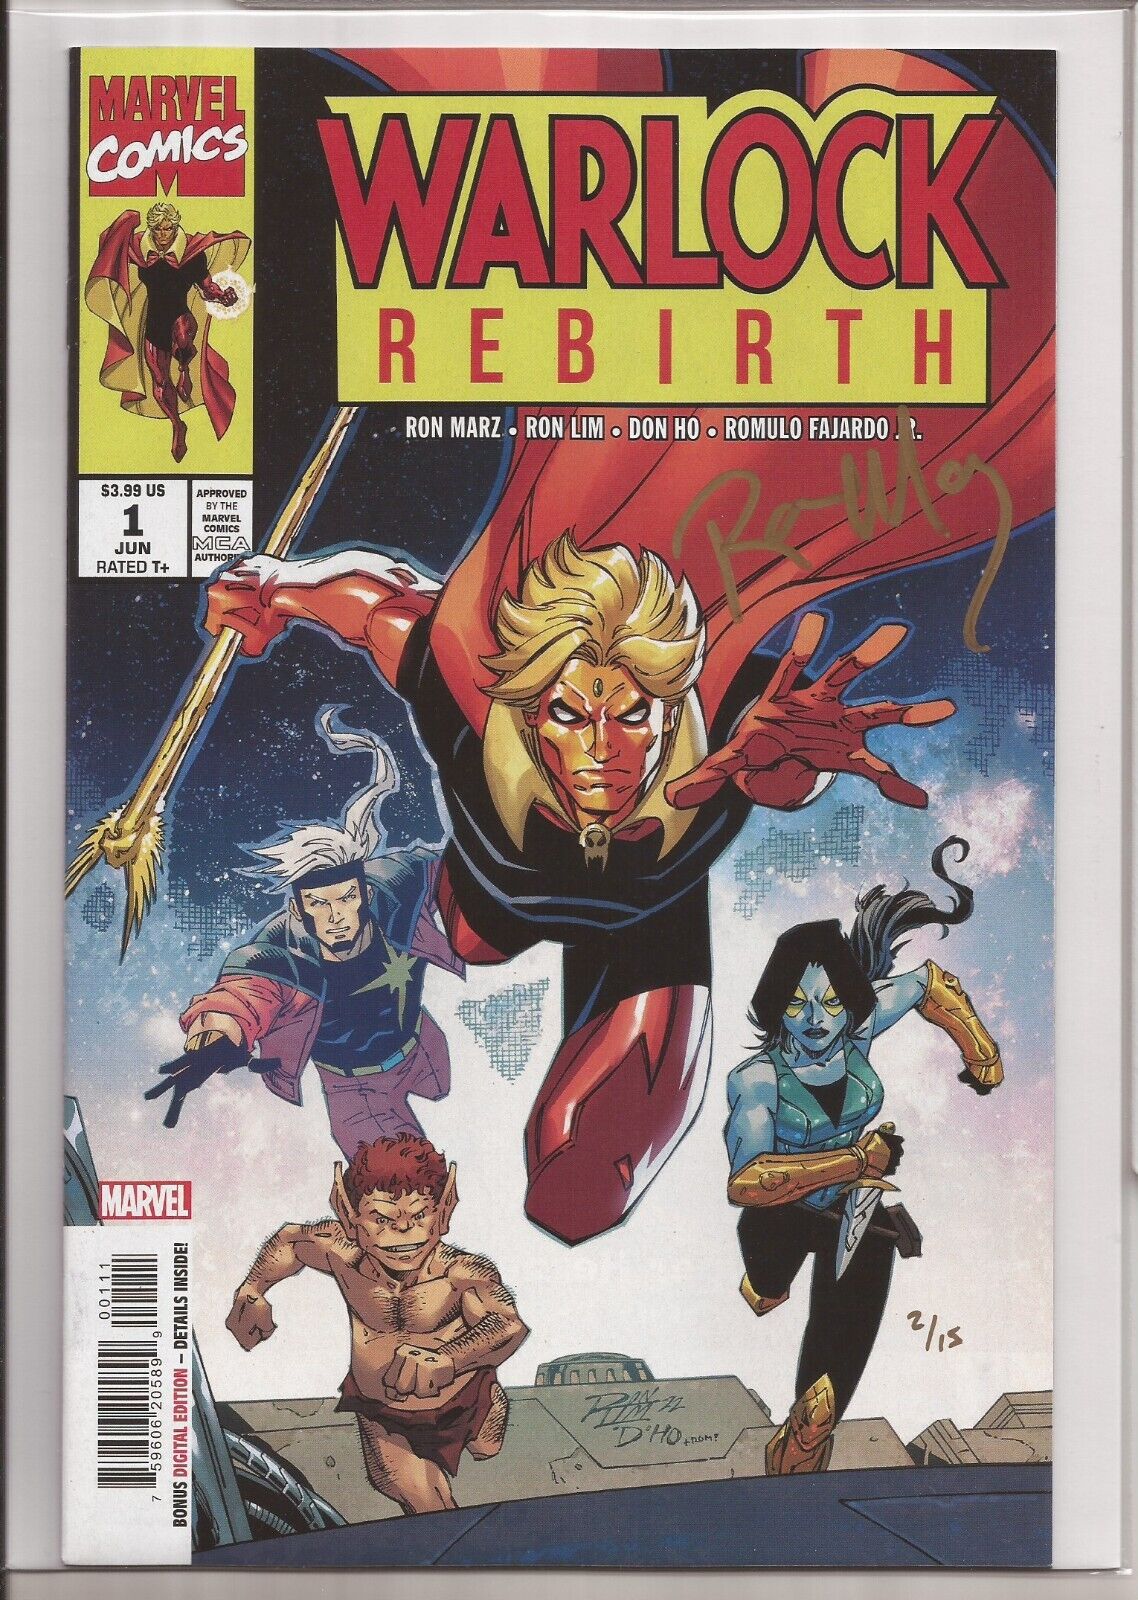 WARLOCK: REBIRTH #1 - SIGNED BY RON MARZ WITH DF COA #2 OF ONLY 15 COPIES!!